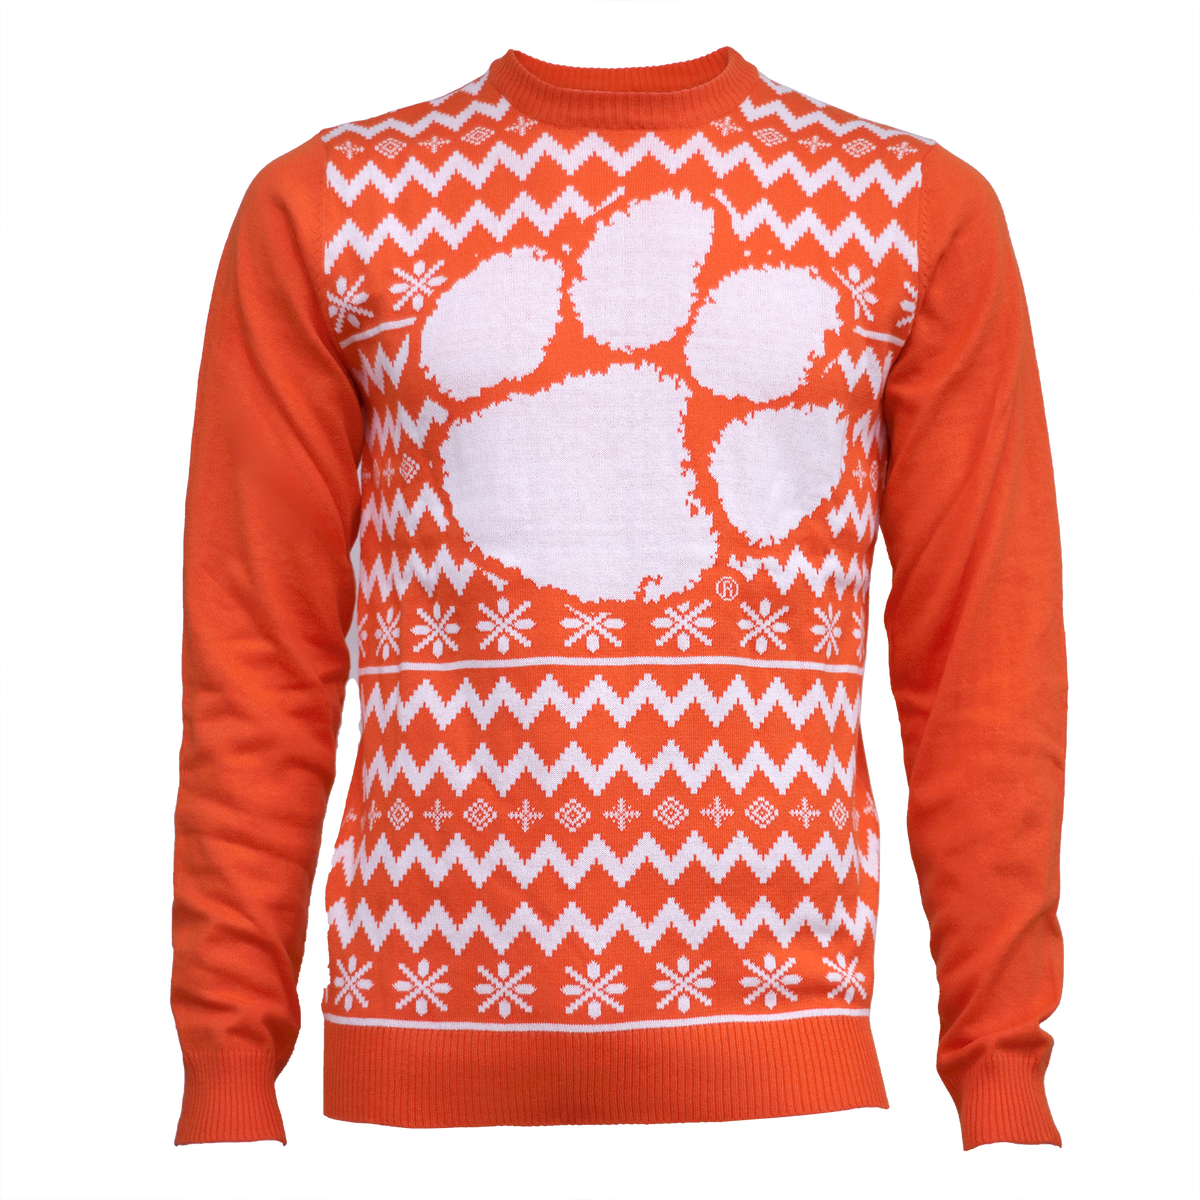 Clemson Sweater with Full Front Paw